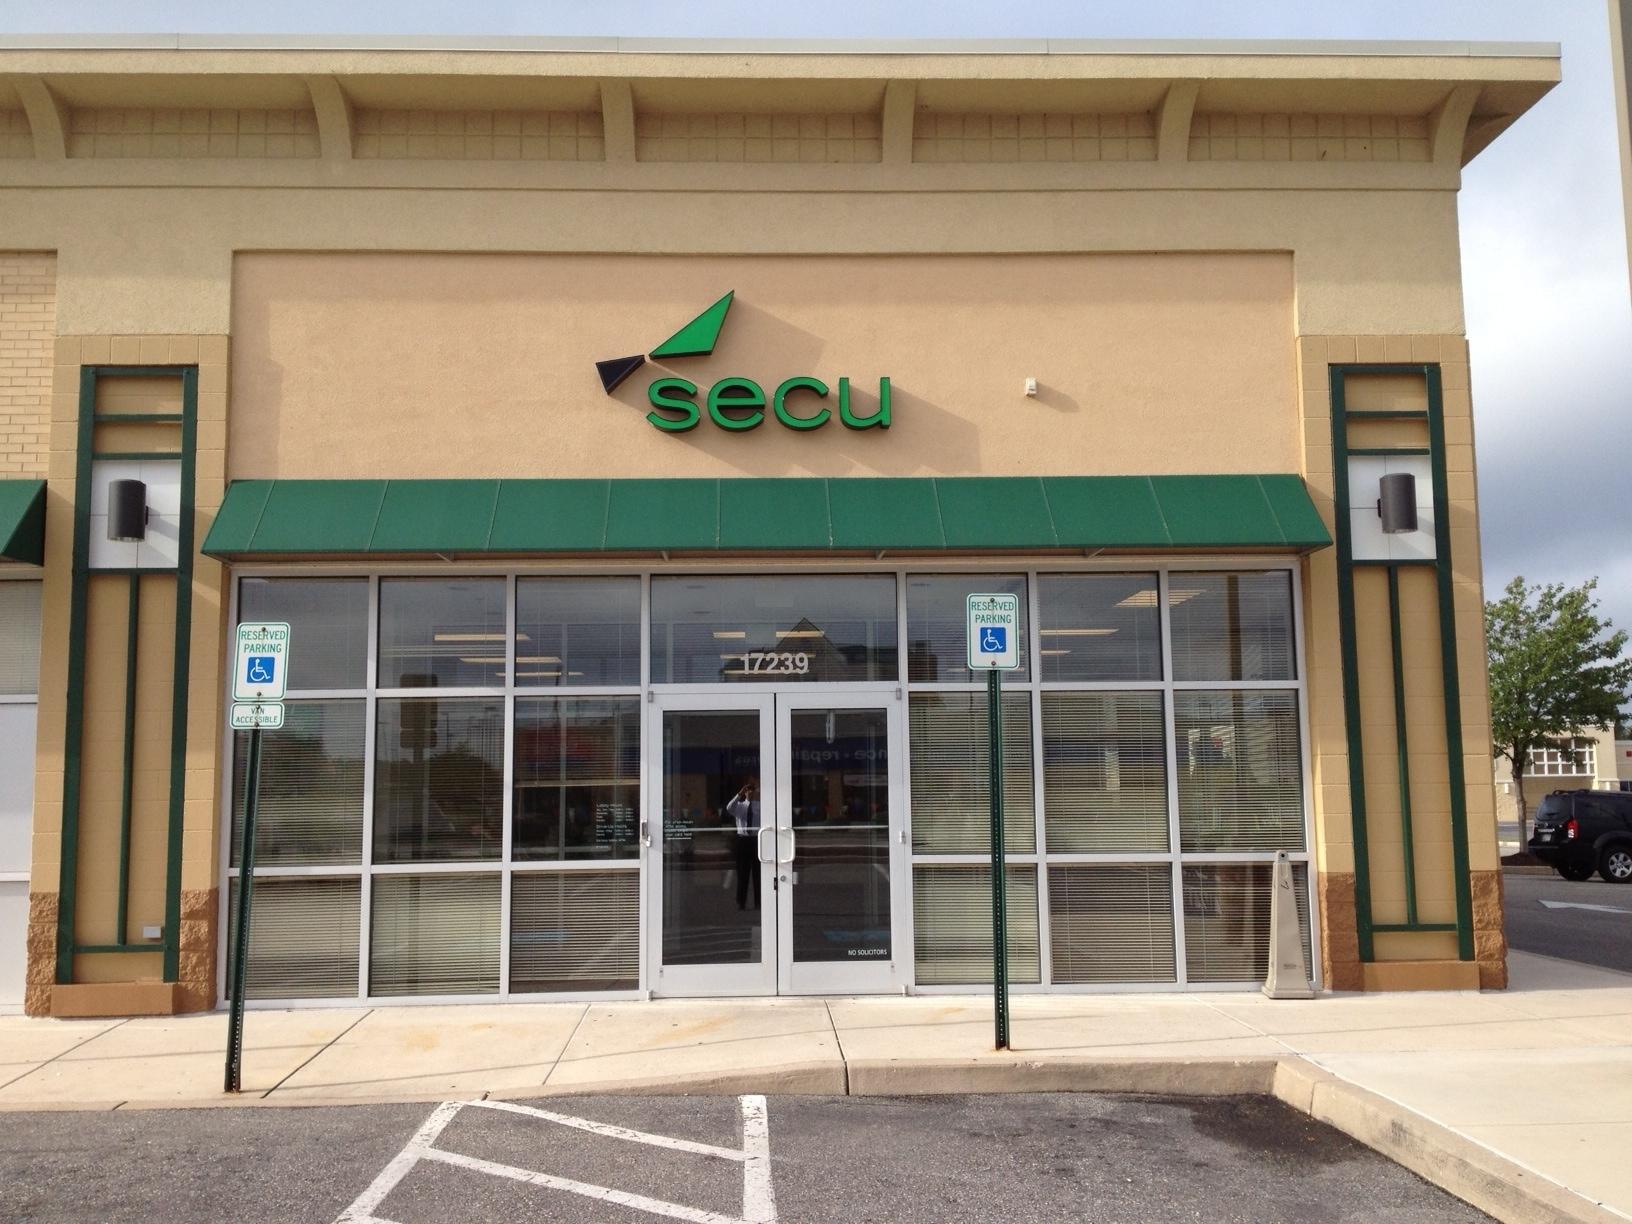 SECU Credit Union Coupons near me in Hagerstown, MD 21740